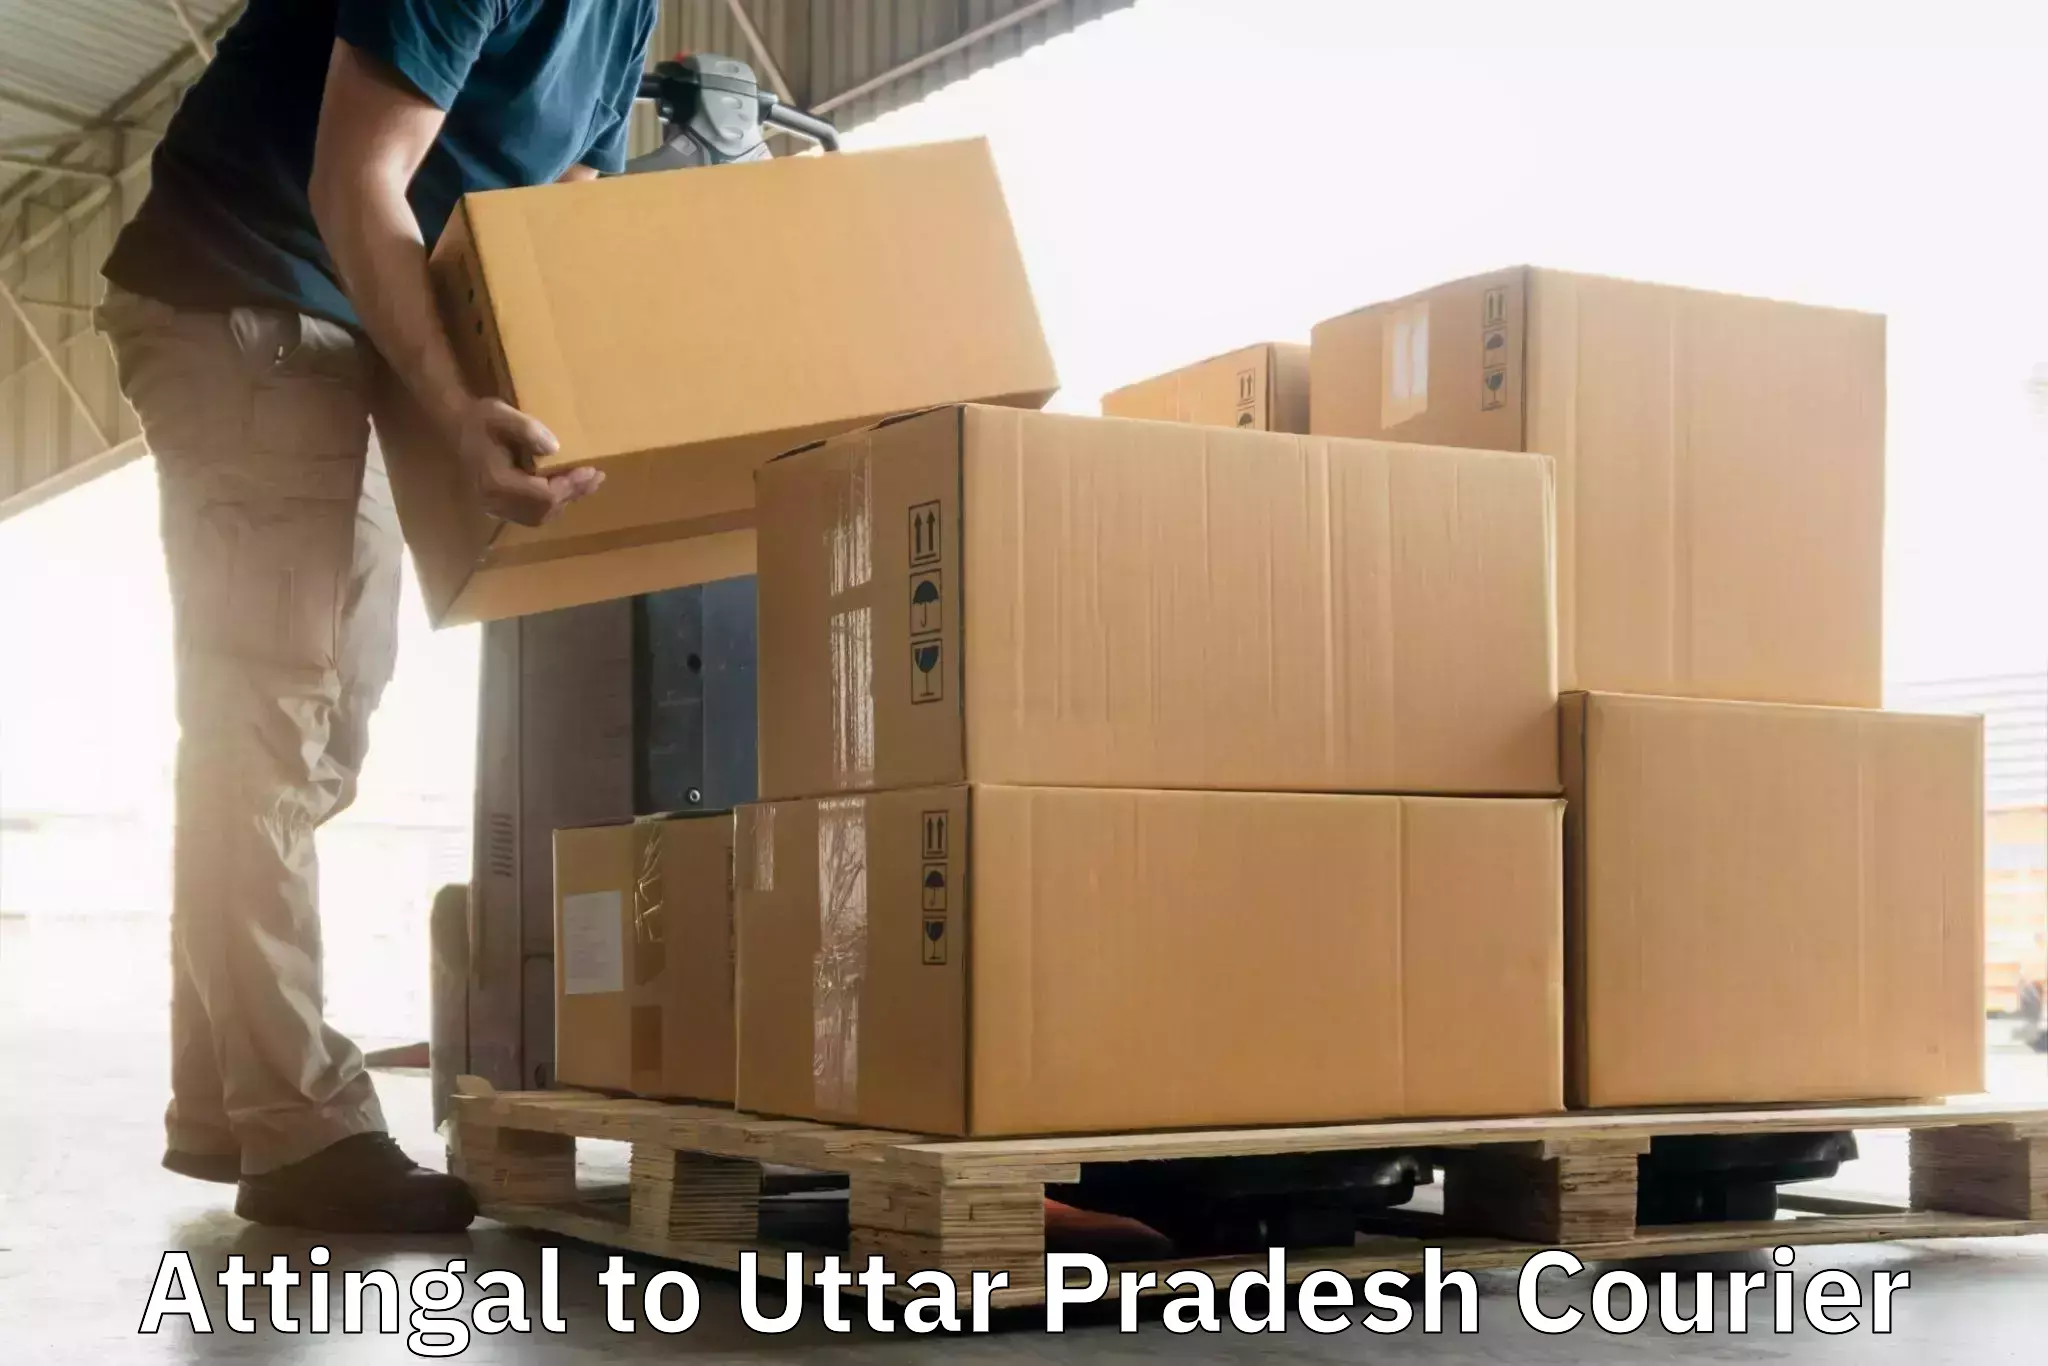 Full-service courier options Attingal to Hathras